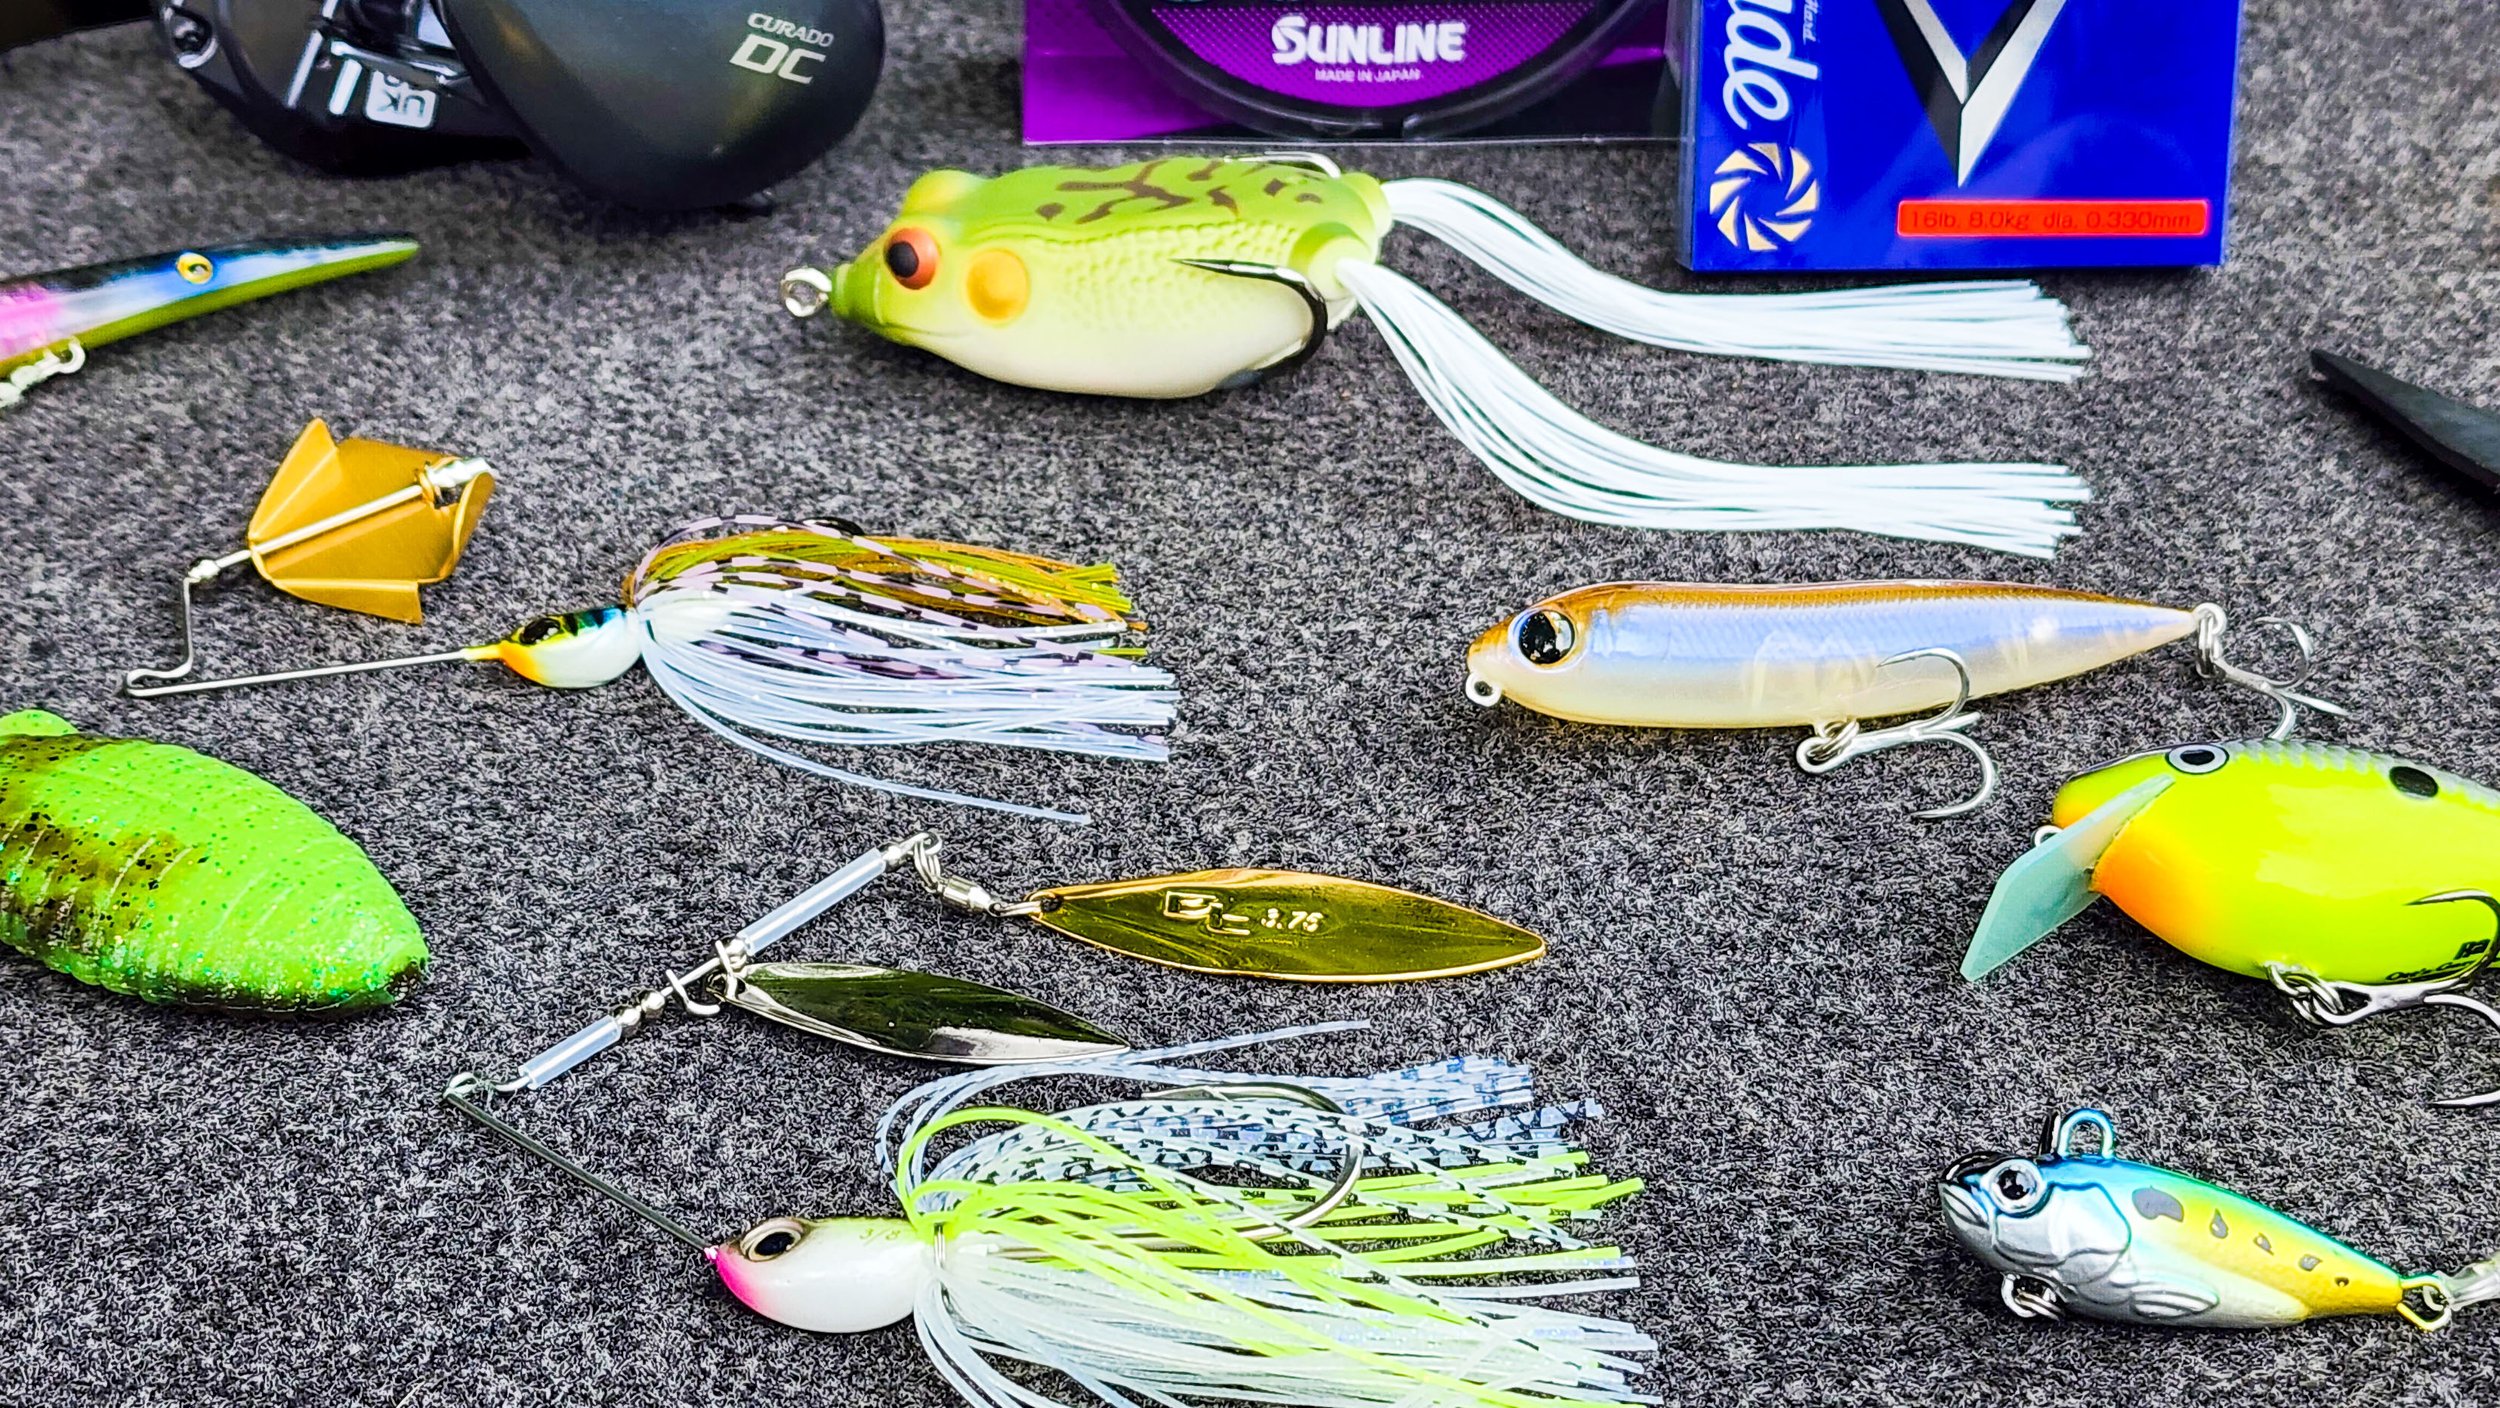 Bass Fishing Gear Review!! The Best Baits We've Seen In Years